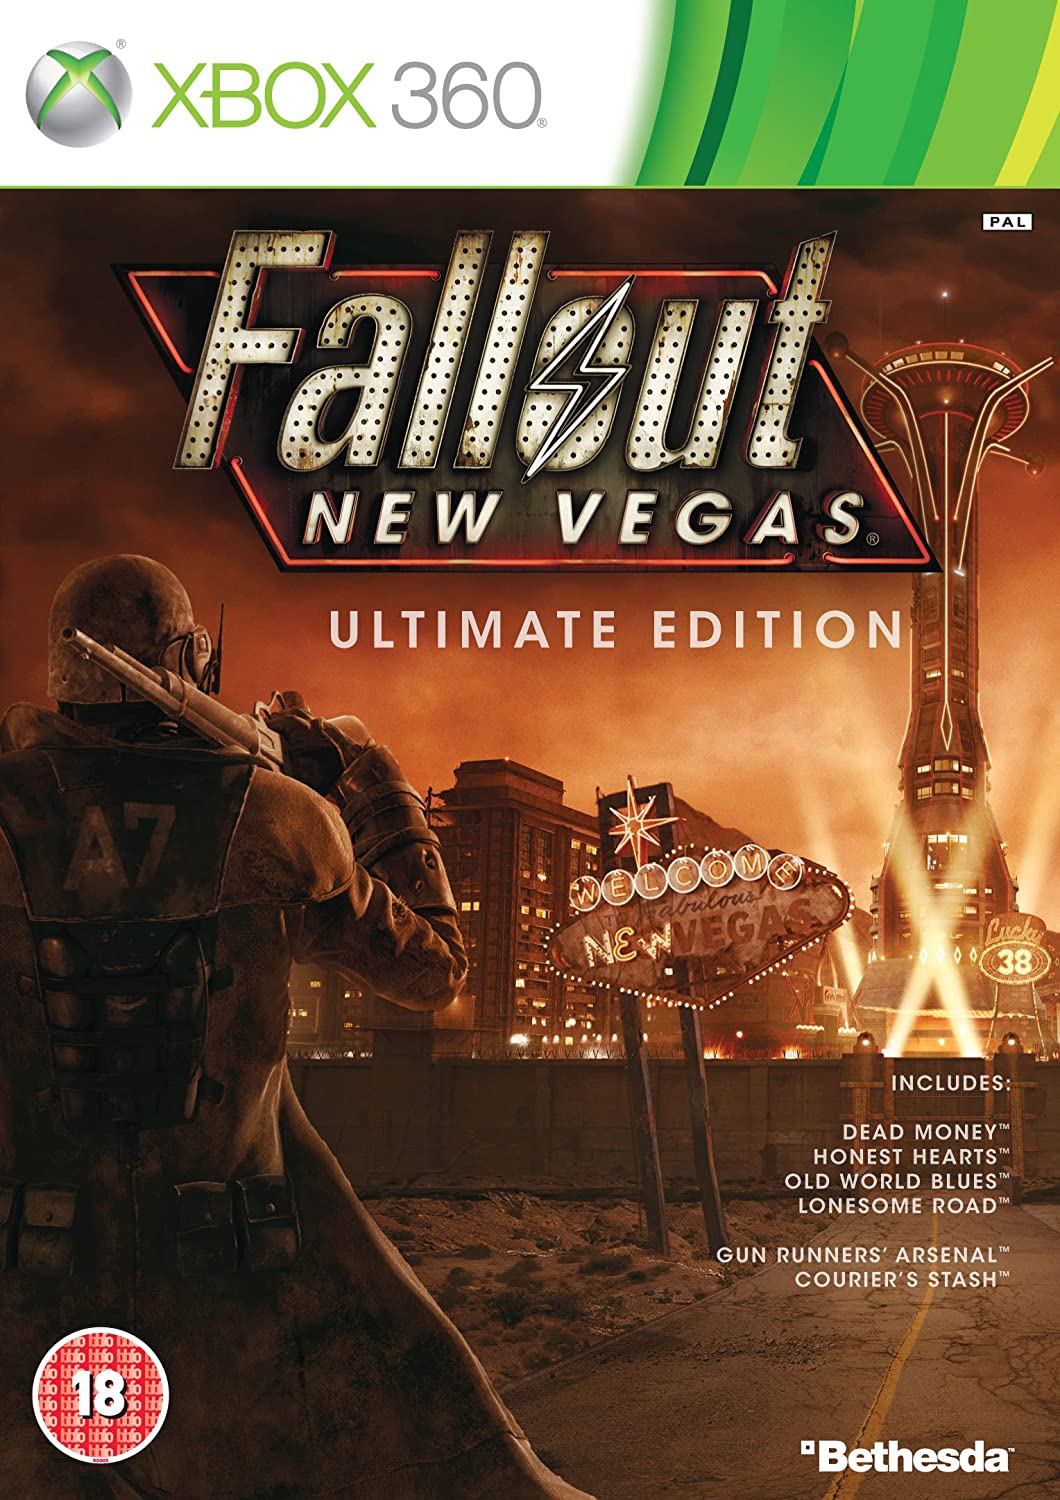 Fallout New Vegas Ultimate Edition (Német)